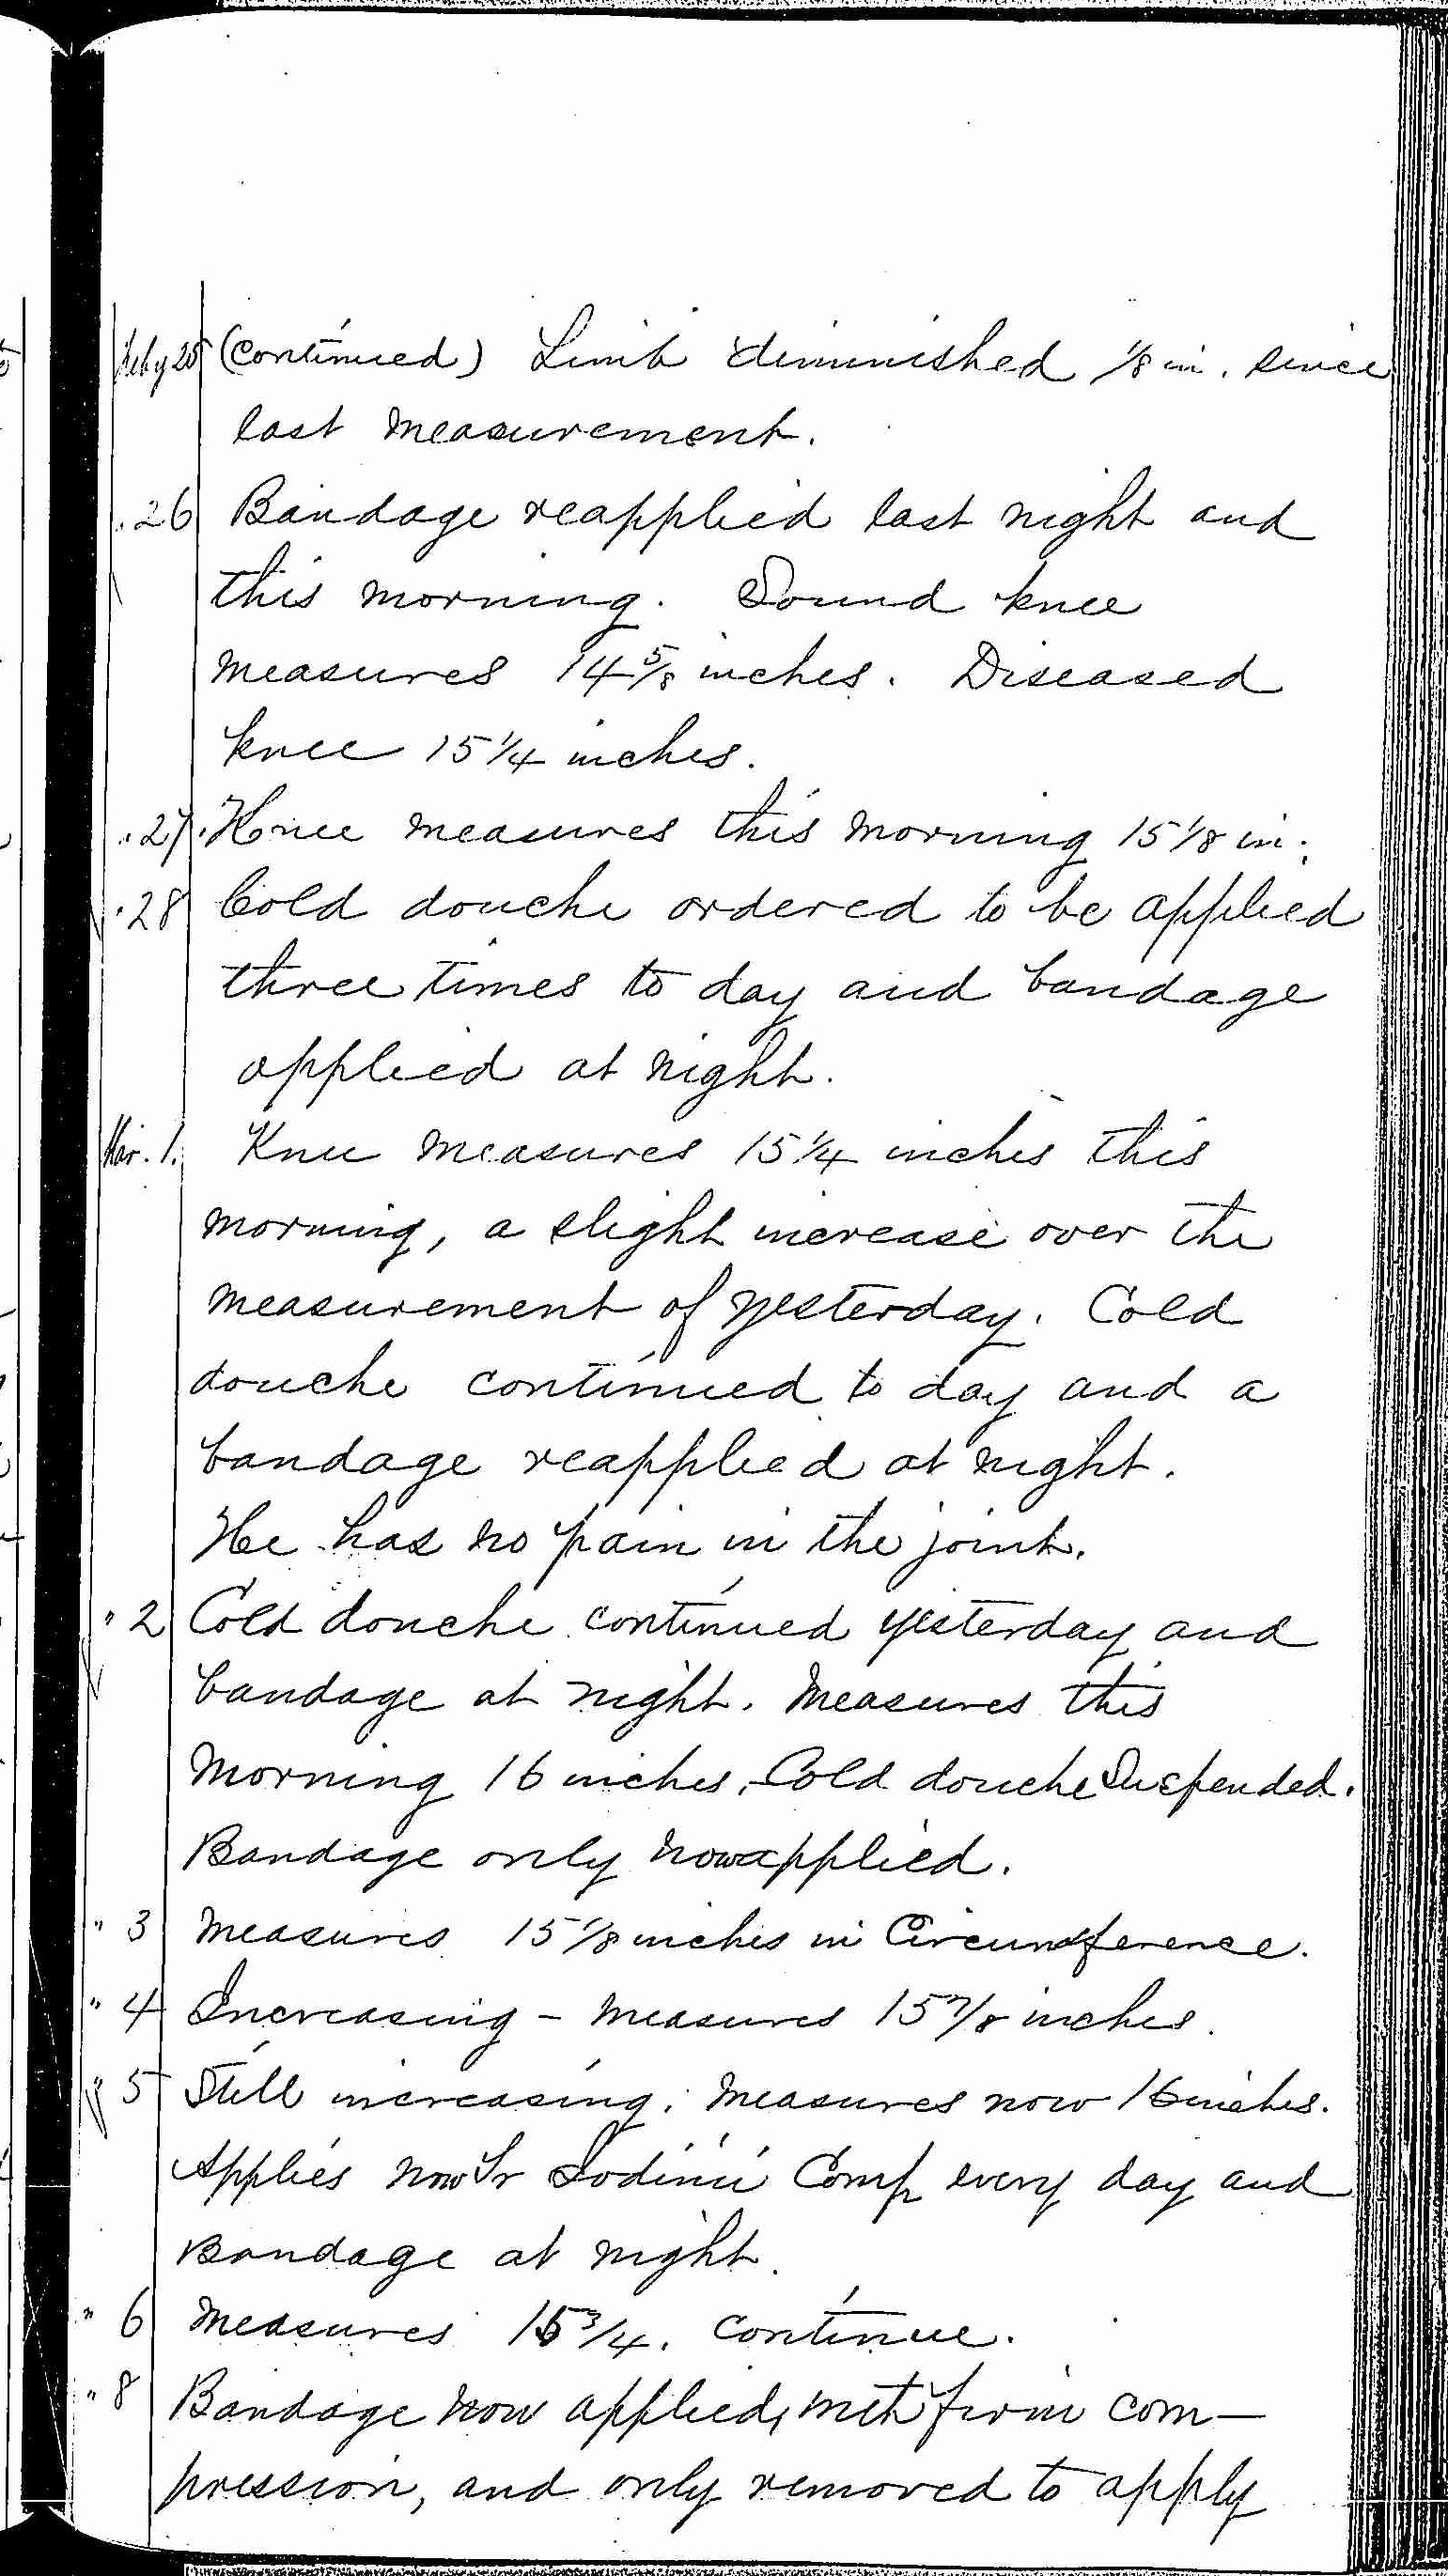 Entry for Henry James (page 3 of 8) in the log Hospital Tickets and Case Papers - Naval Hospital - Washington, D.C. - 1868-69